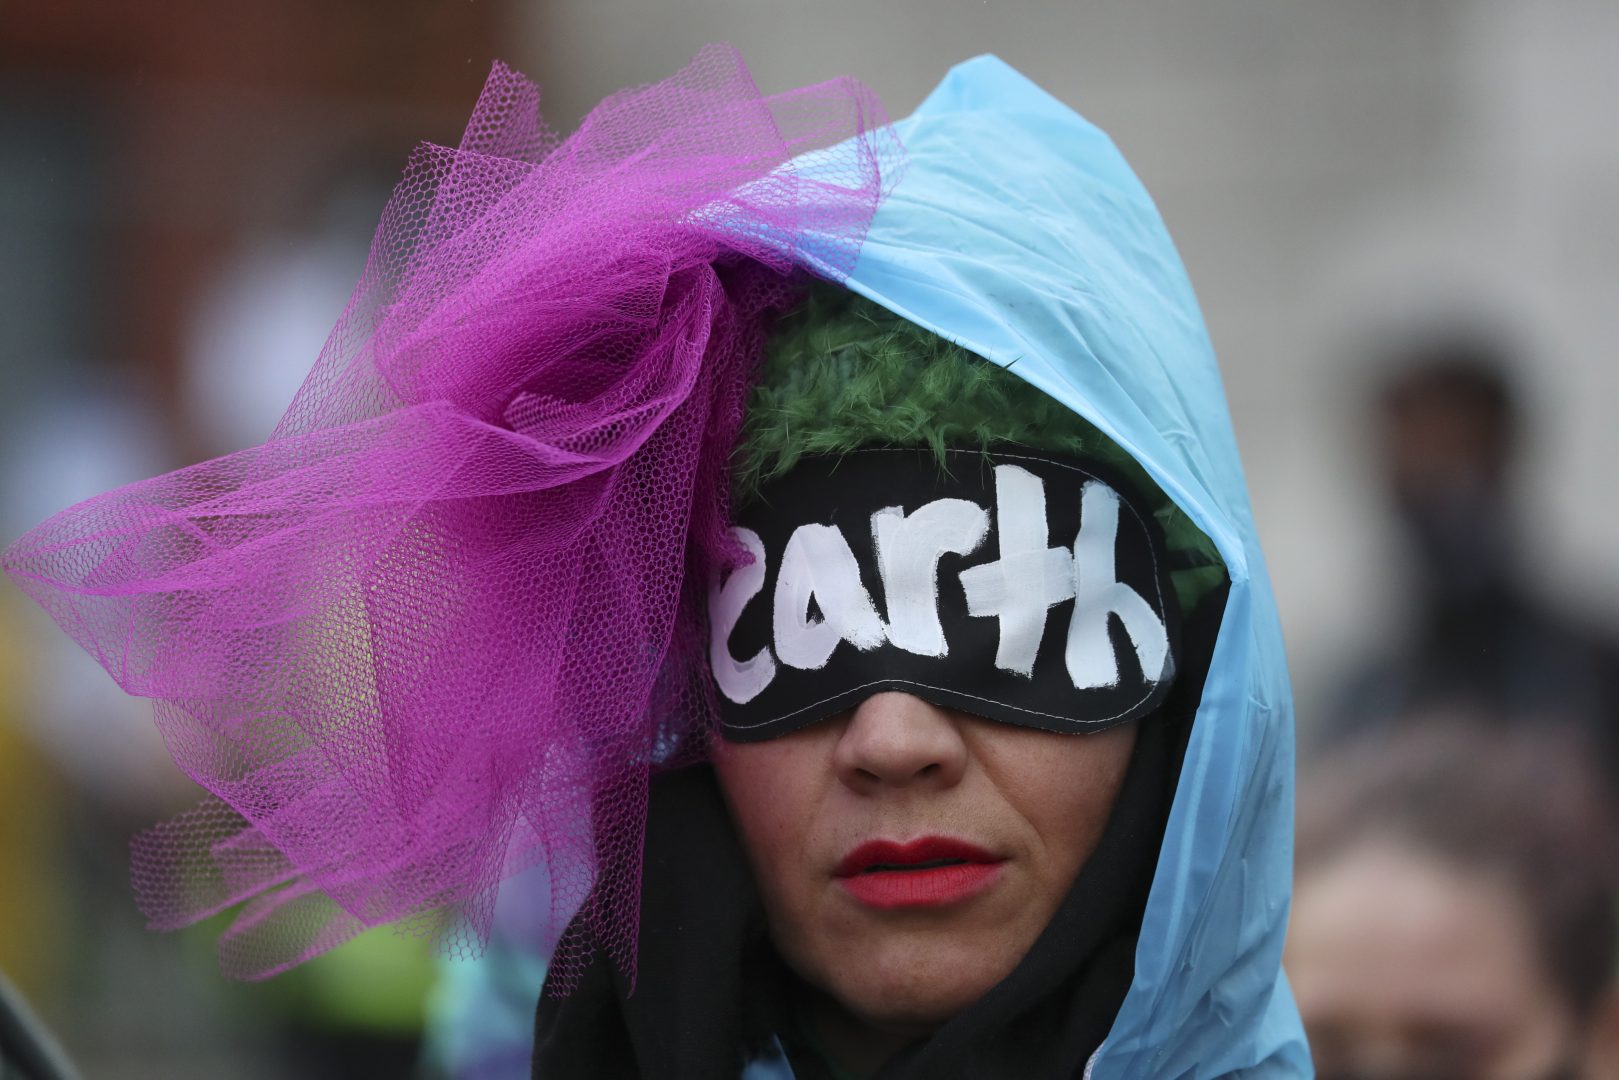 A climate activist takes part in a demonstration outside the venue of the COP26 U.N. Climate Summit in Glasgow, Scotland, Friday, Nov. 12, 2021. Negotiators from almost 200 nations were making a fresh push Friday to reach agreements on a series of key issues that would allow them to call this year's U.N. climate talks a success. (AP Photo/Scott Heppell)